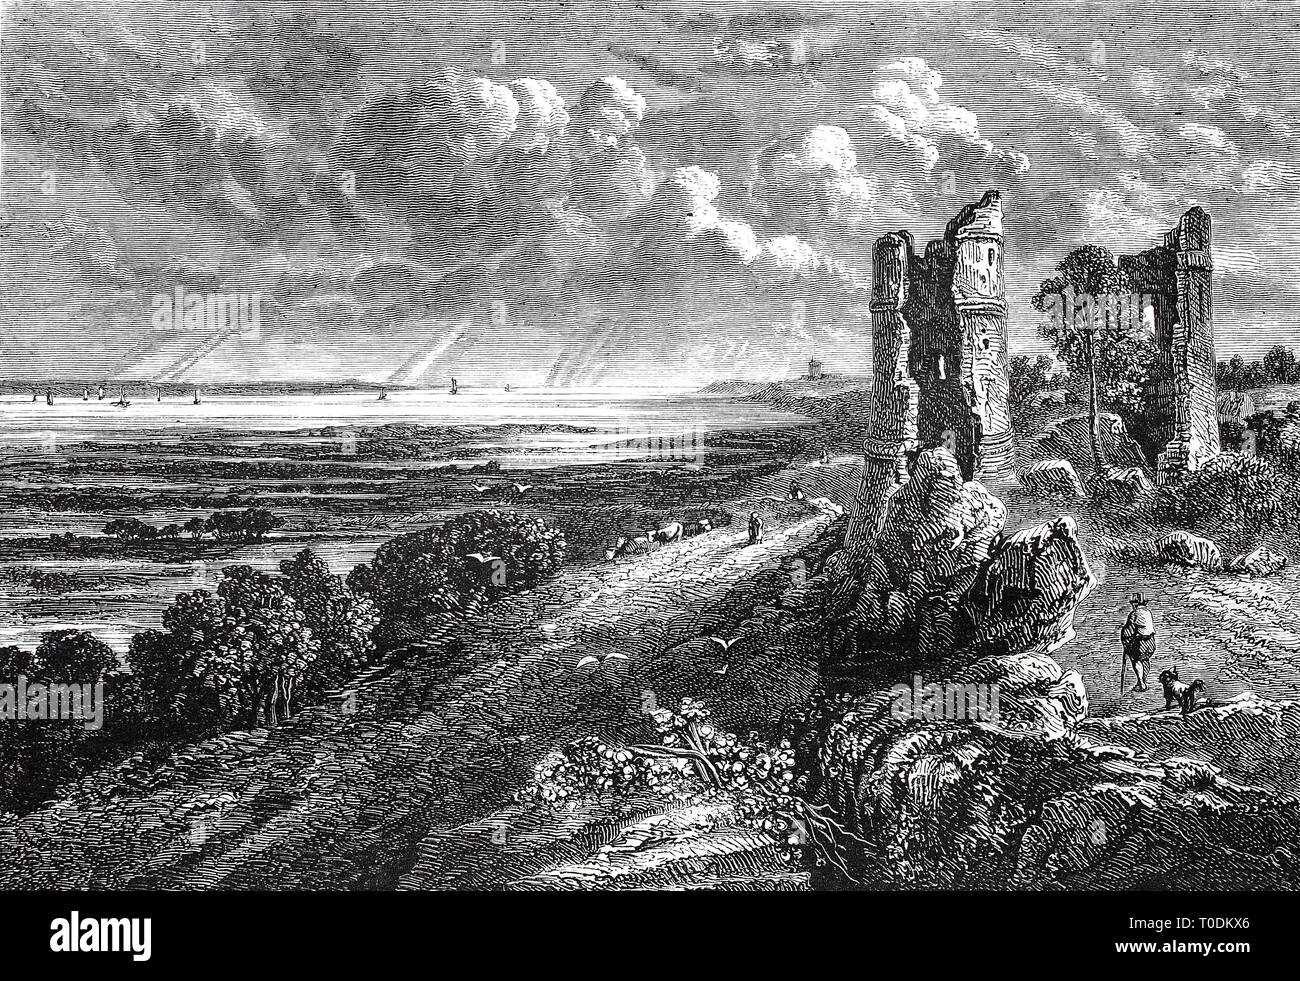 Digital improved reproduction, landscape by the sea with a ruined castle, hadleigh castle is a ruined castle on a hillside above the estuary of the thames south of the town of hadleigh in the english county of essex, after a painting by john constable, original woodprint from th 19th century Stock Photo